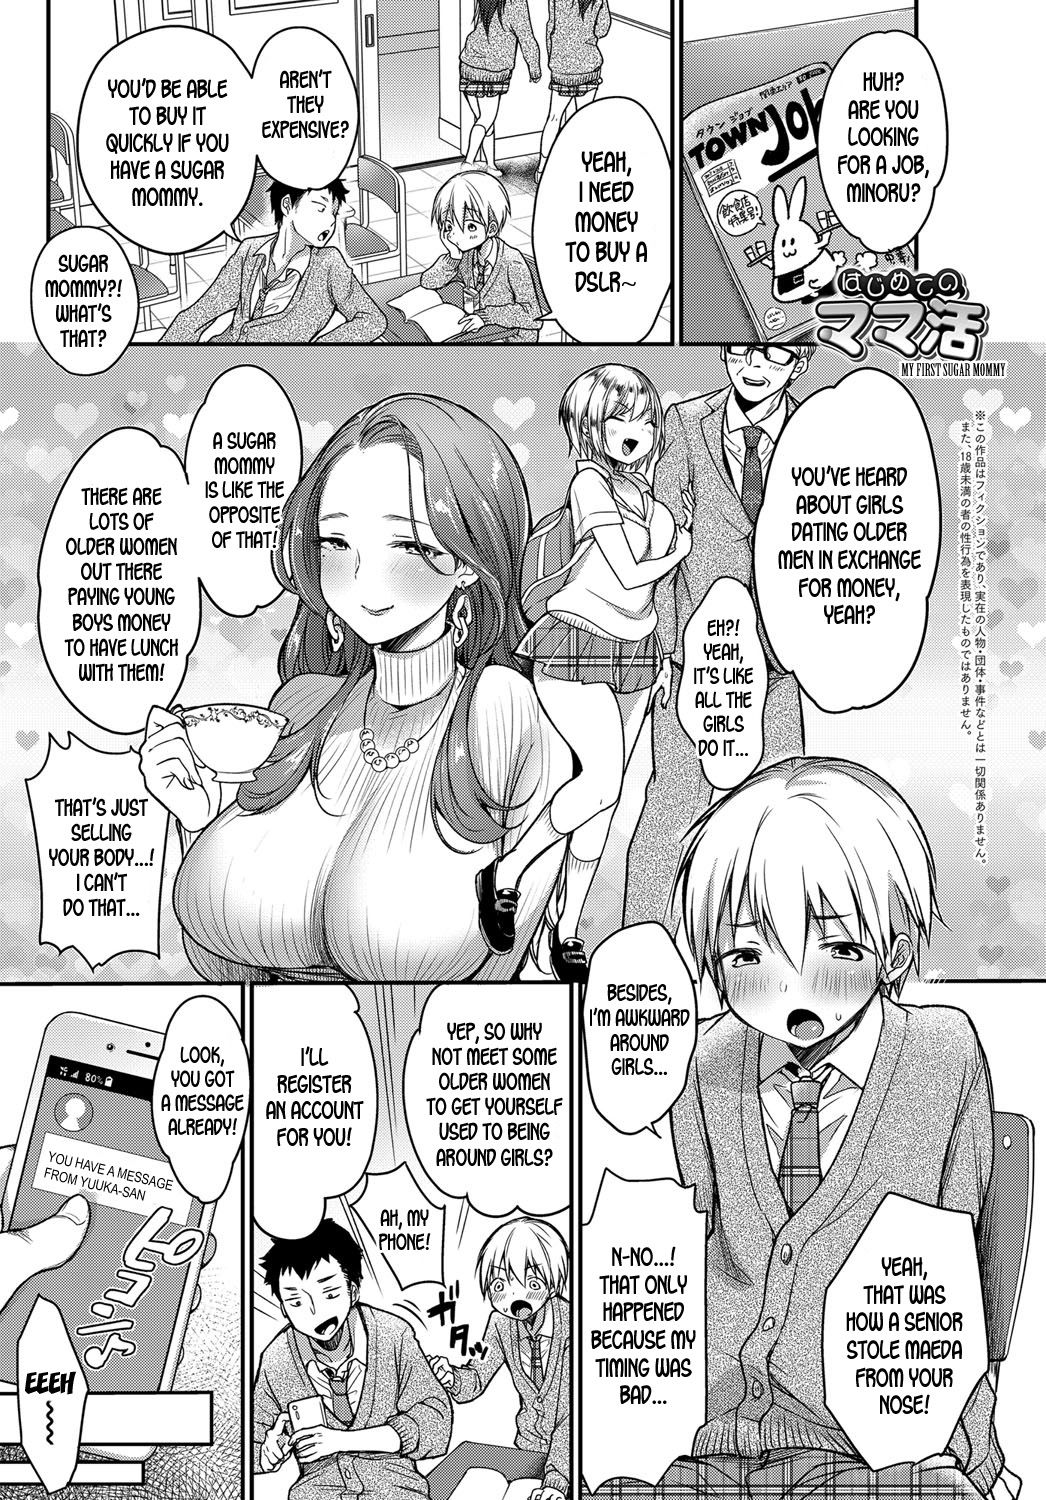 1 . My First Sugar Mommy - Chapter 1 [Misaoka]